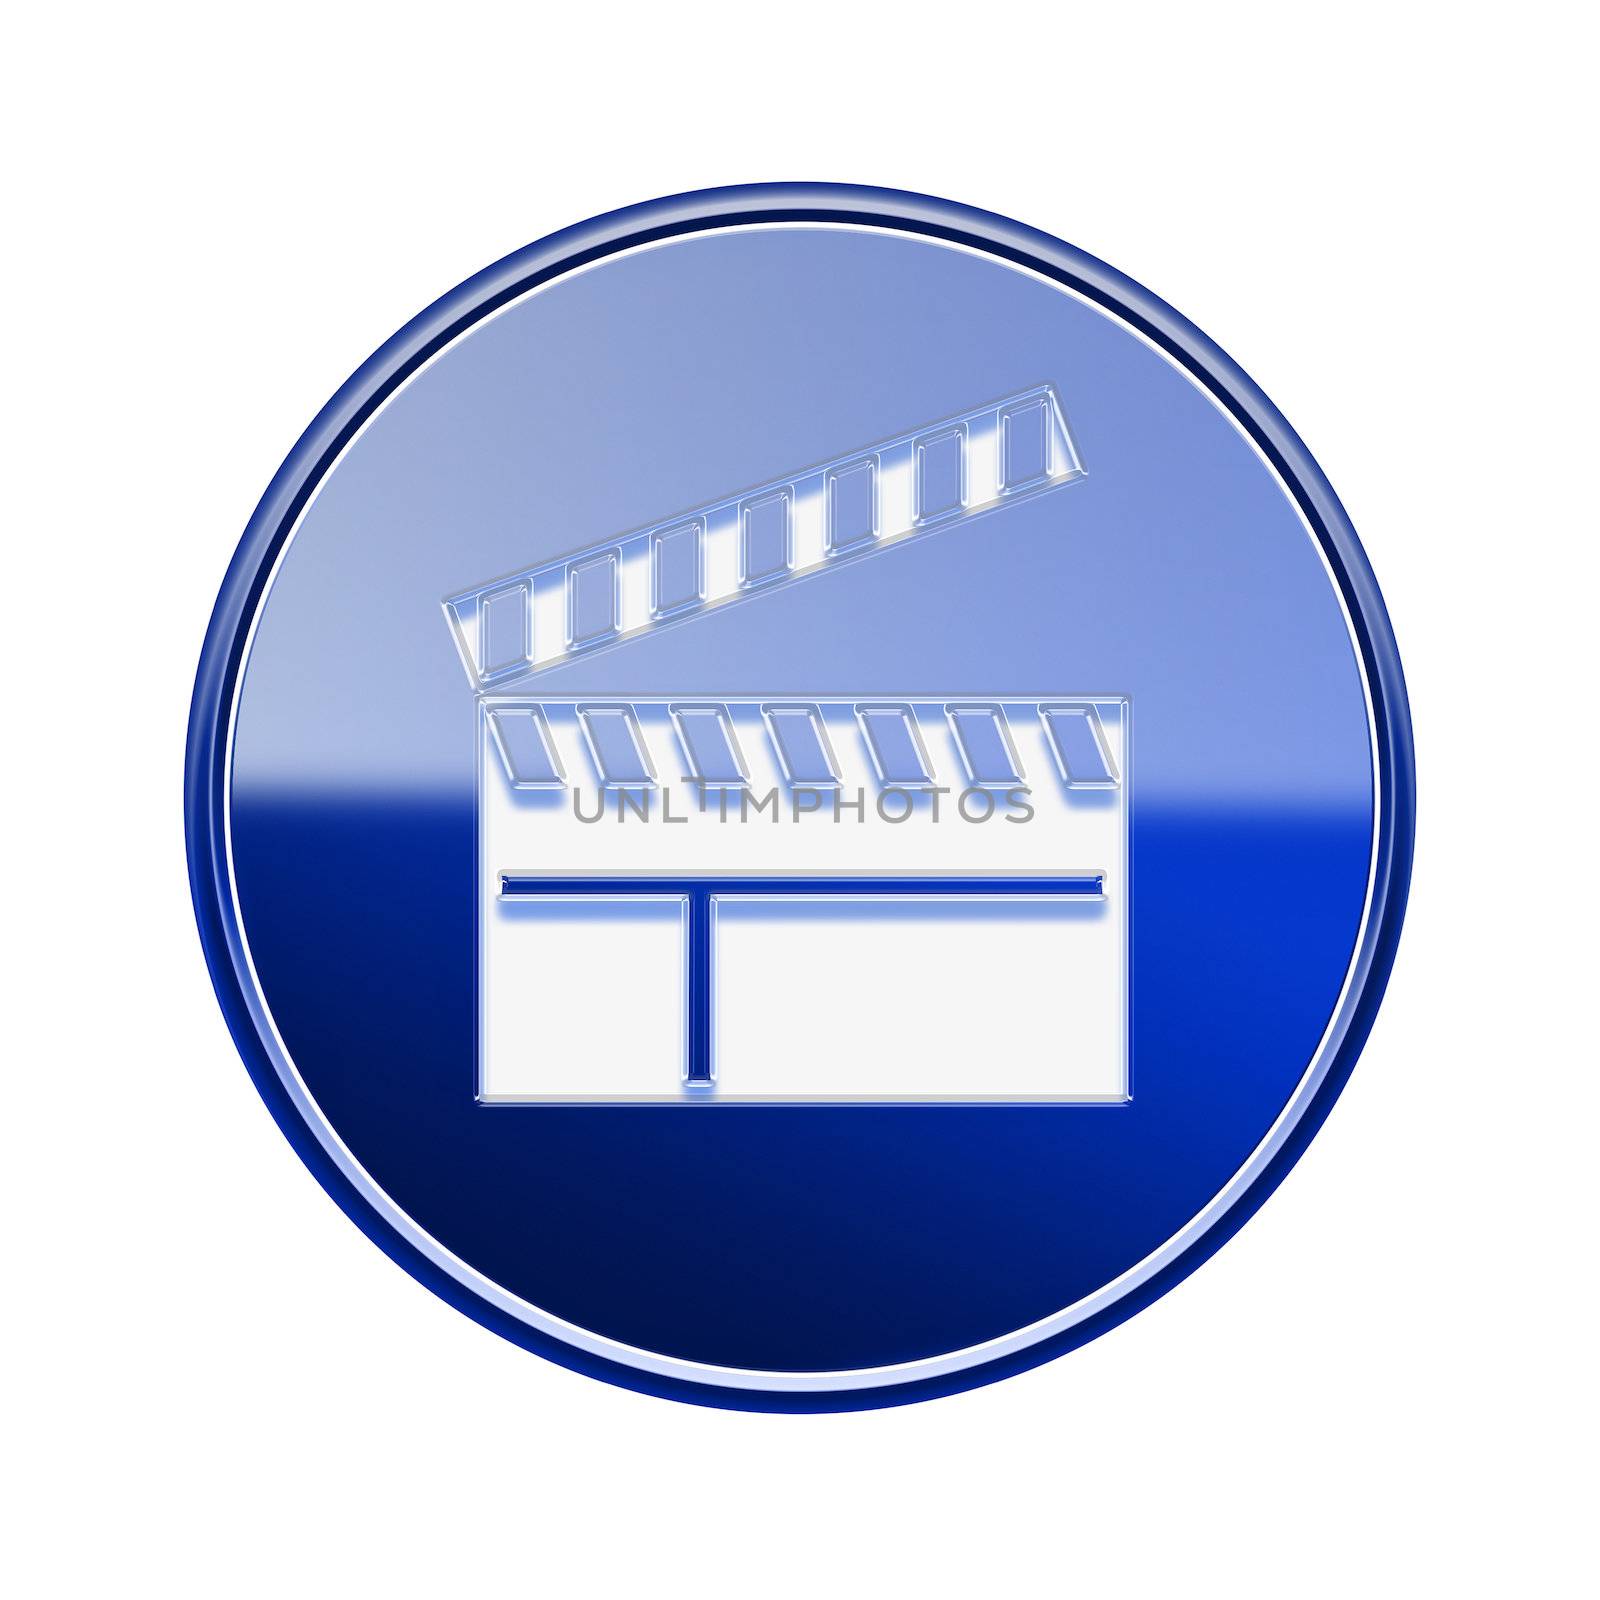 movie clapper board icon glossy blue, isolated on white background.